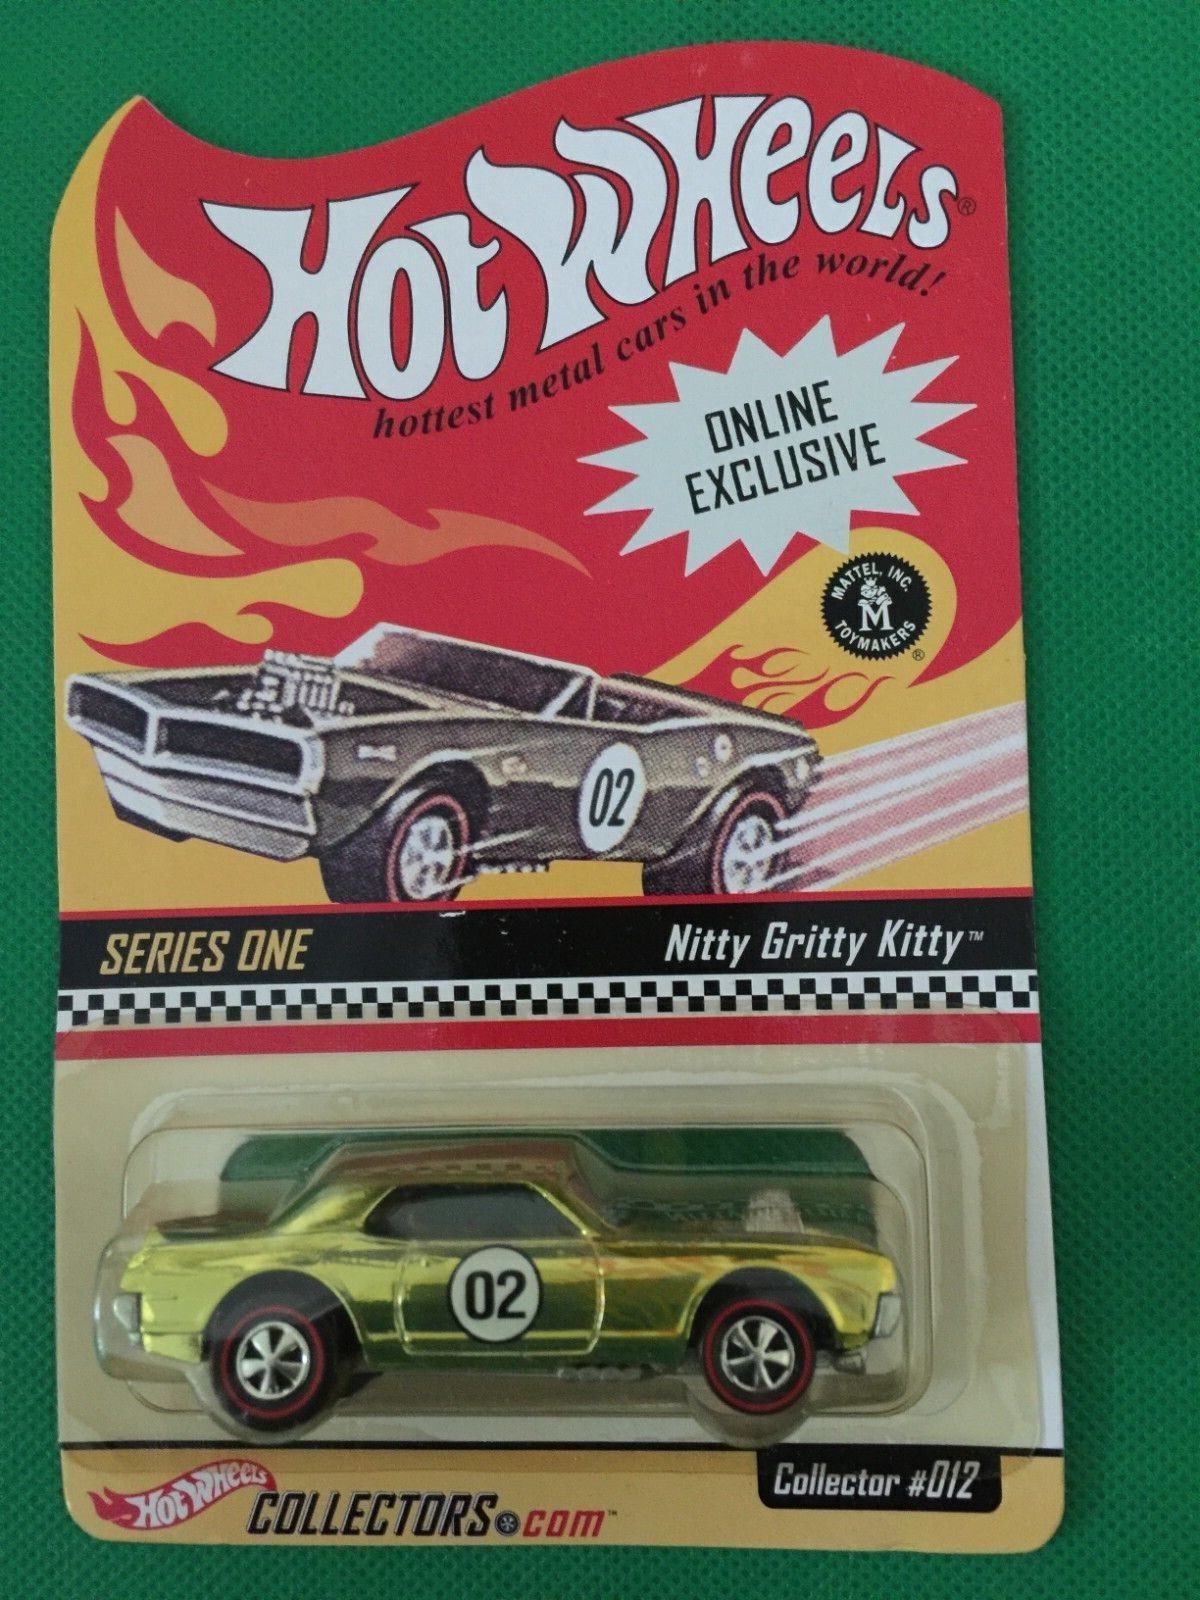 2001 Hot Wheels Online Exclusive Series One #012 NITTY GRITTY KITTY B317